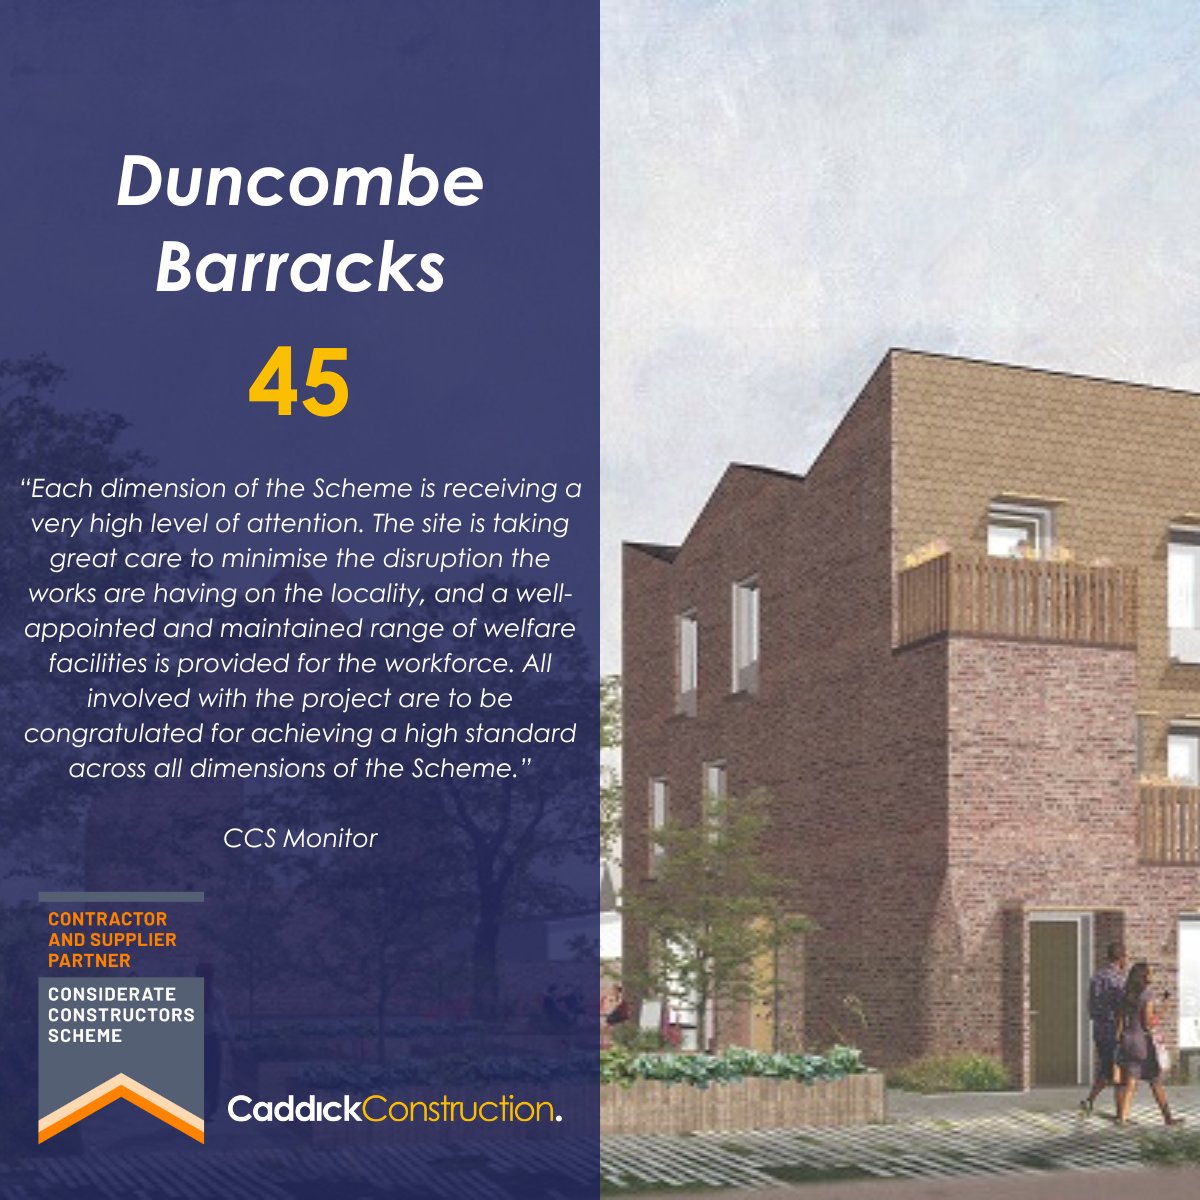 We are thrilled to have received another score of 45/45 on our latest @CCScheme visit at our Duncombe Barracks site 🏆 Congratulations to all the site team and supply chain partners for achieving this fantastic score! #BuildingTogether #loveconstruction #CCS #passivhaus